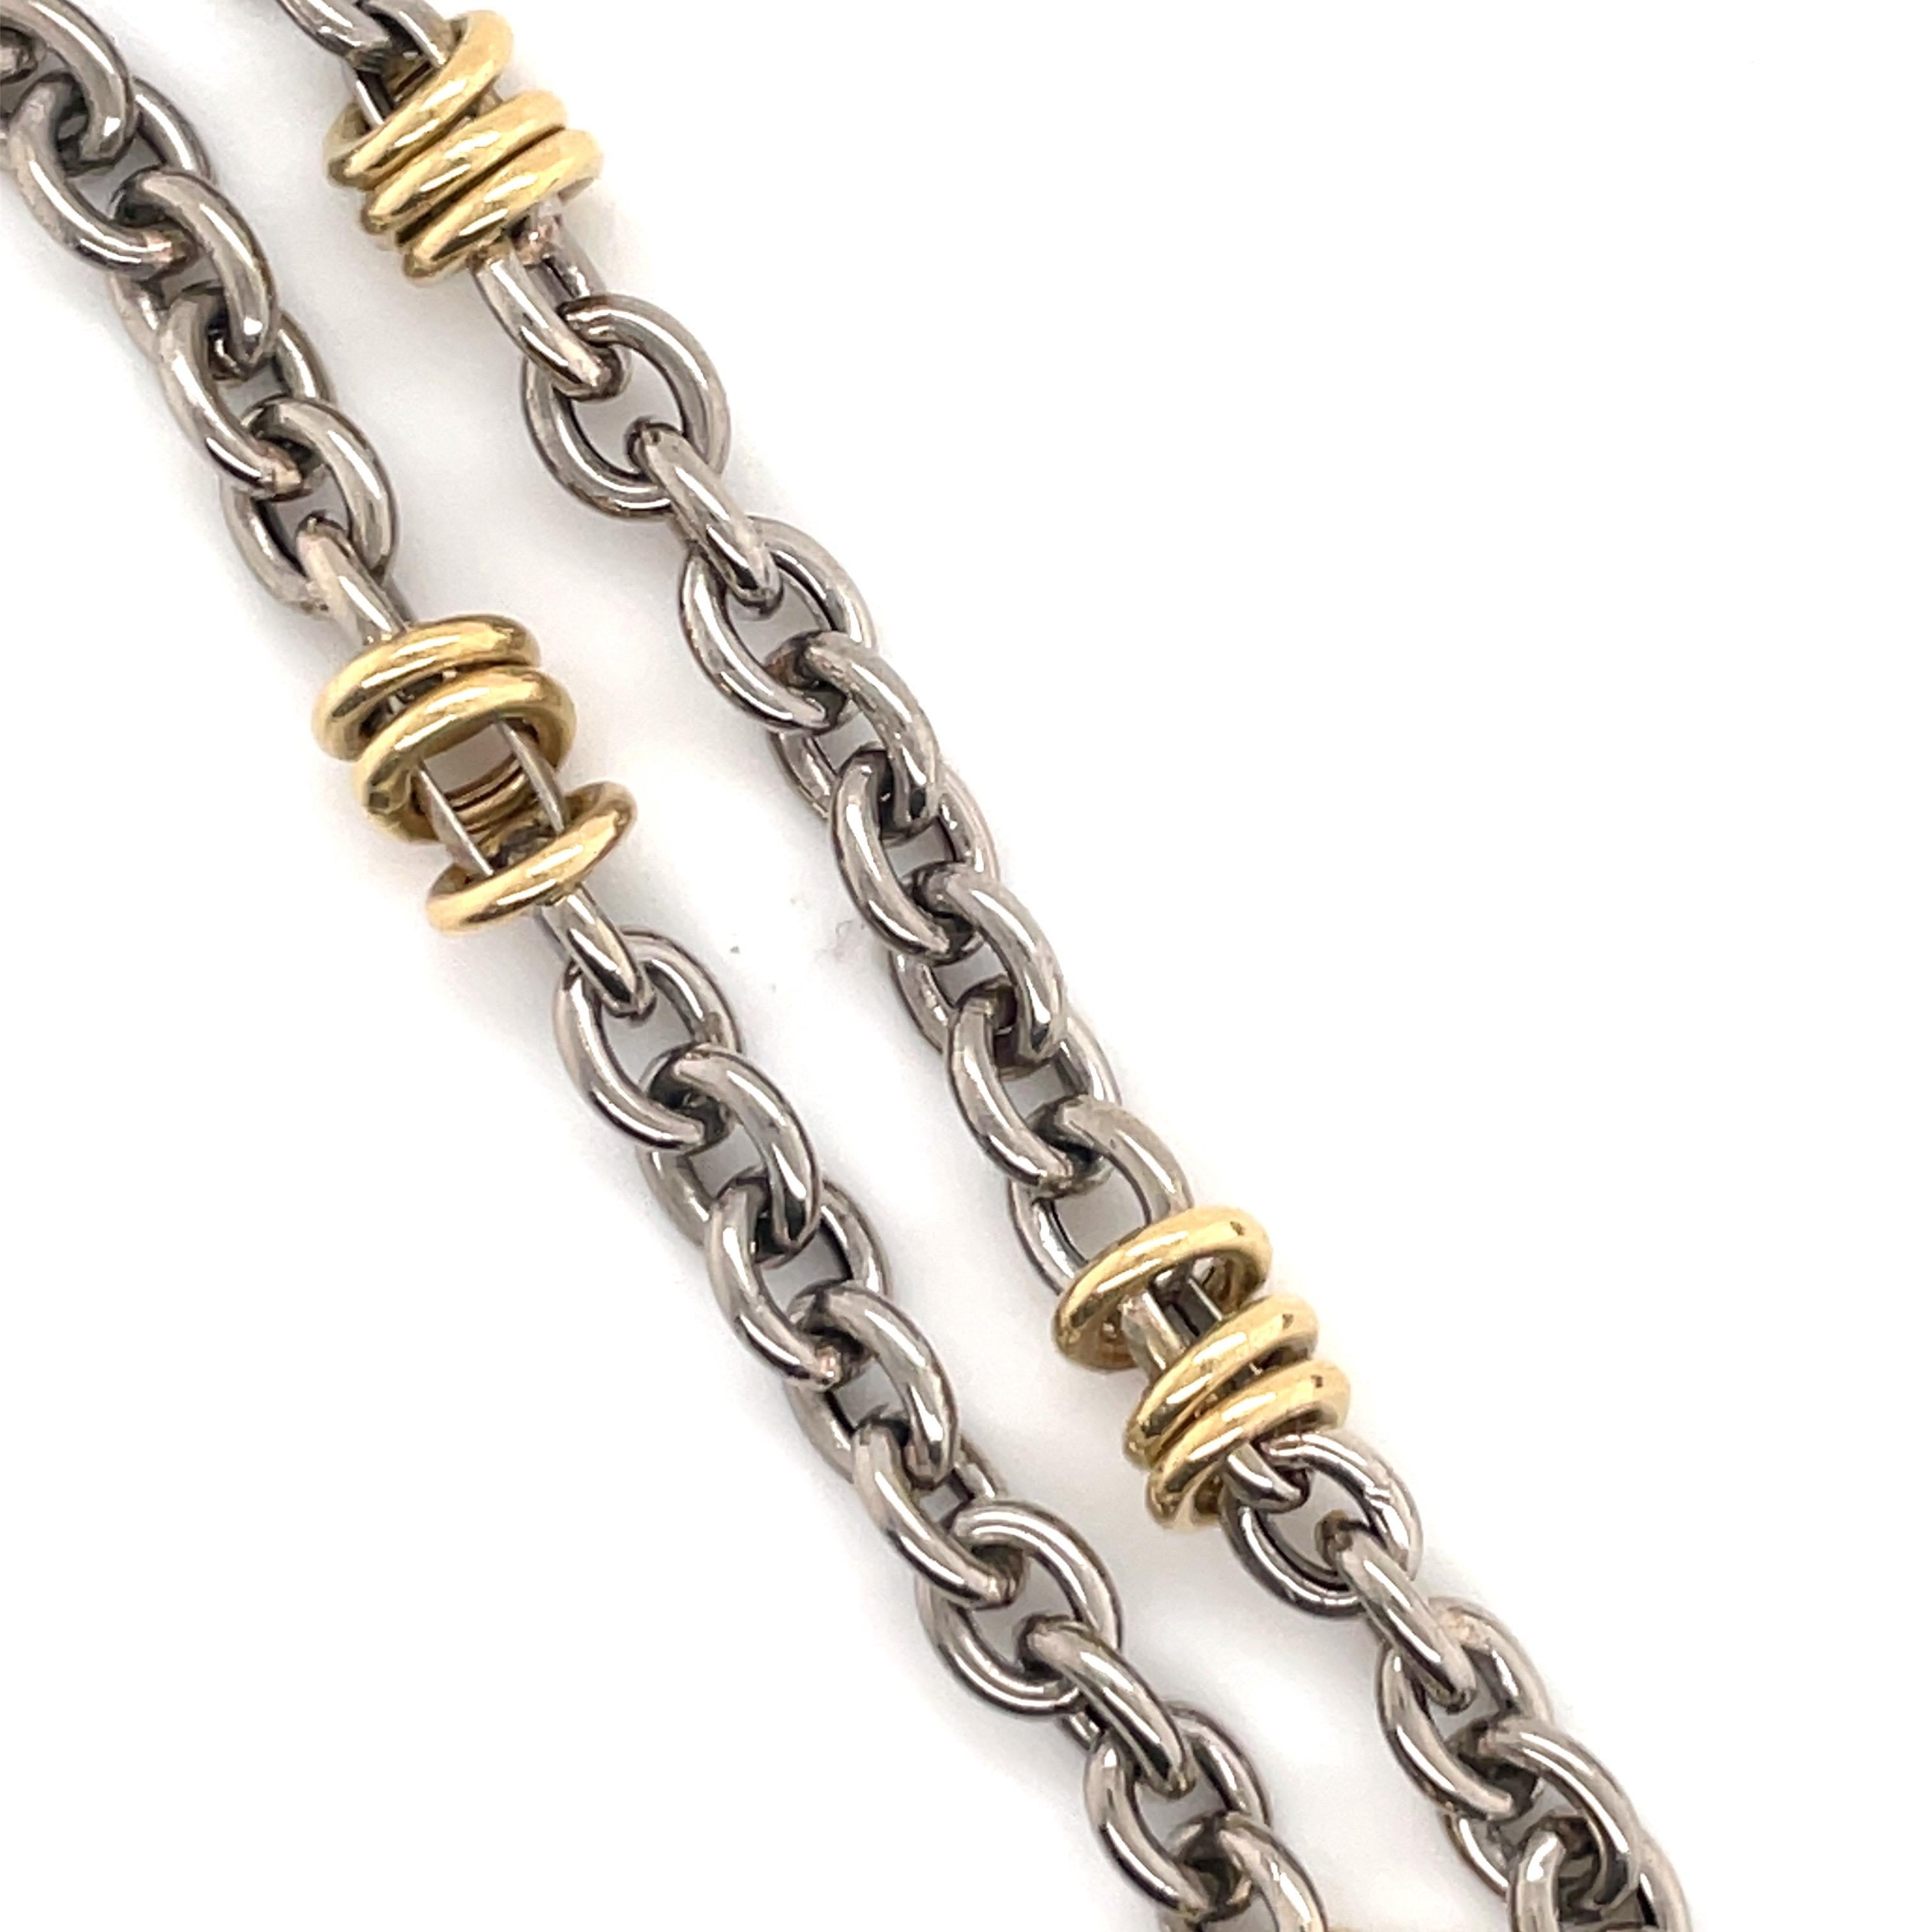 Platinum and 18 Karat yellow gold bracelet featuring small links weighing 10.8 grams, made in Italy.
Great for stacking.